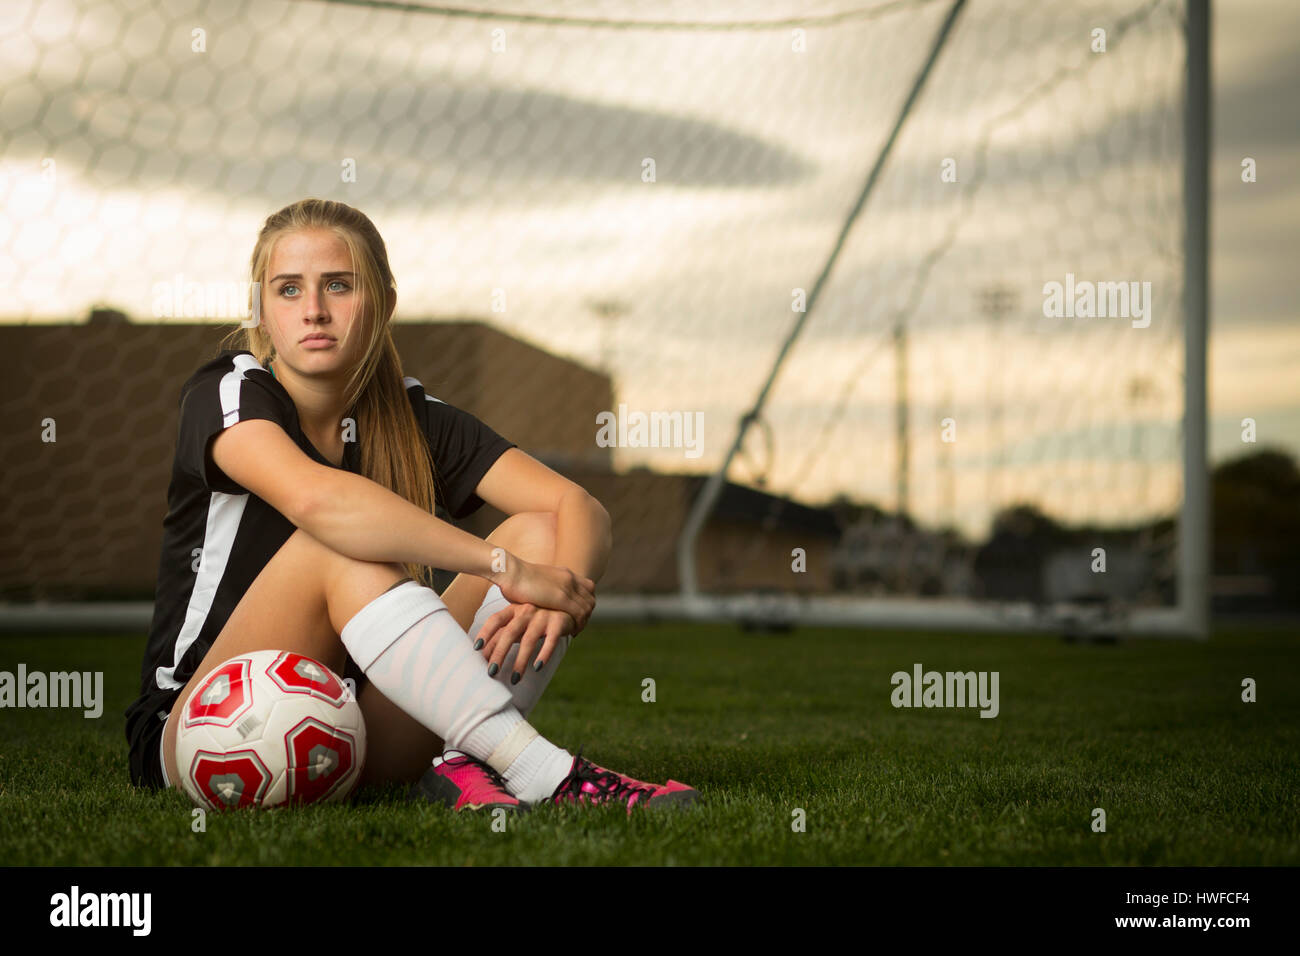 Athlete sitting with ball in soccer goal under sunset sky Stock Photo